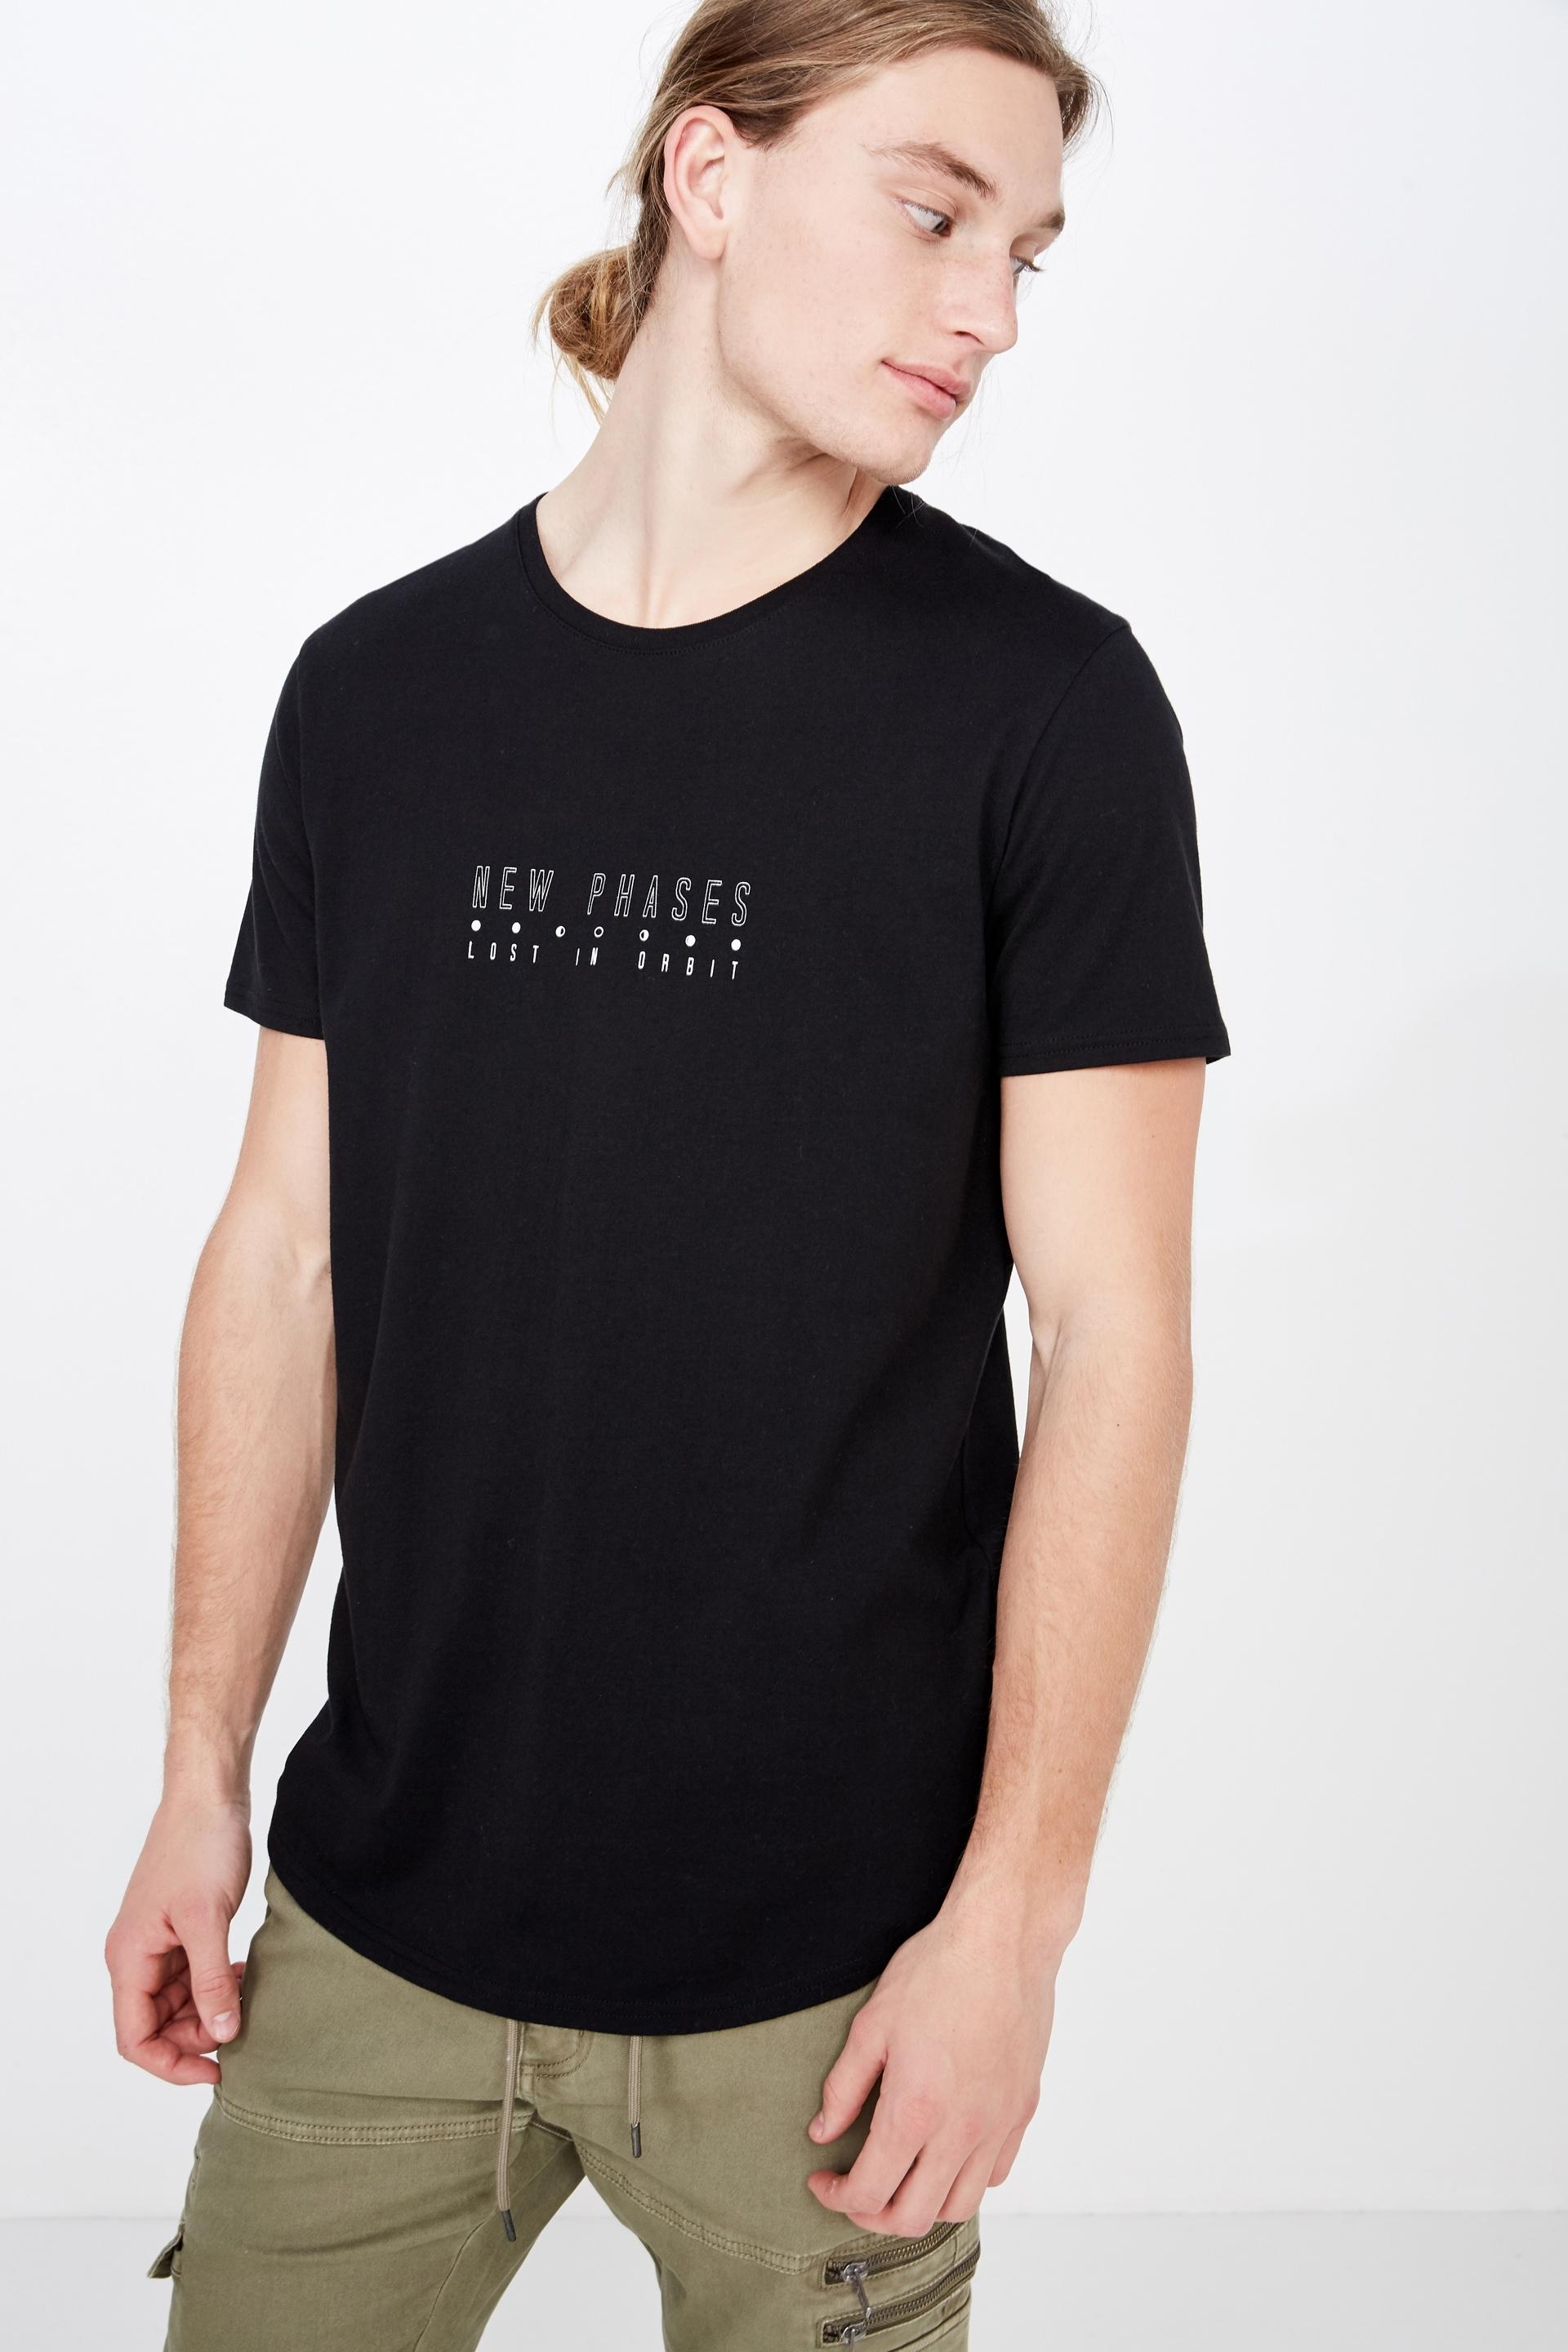 Curved hem graphic short sleeve tee - black/new phases Factorie T ...